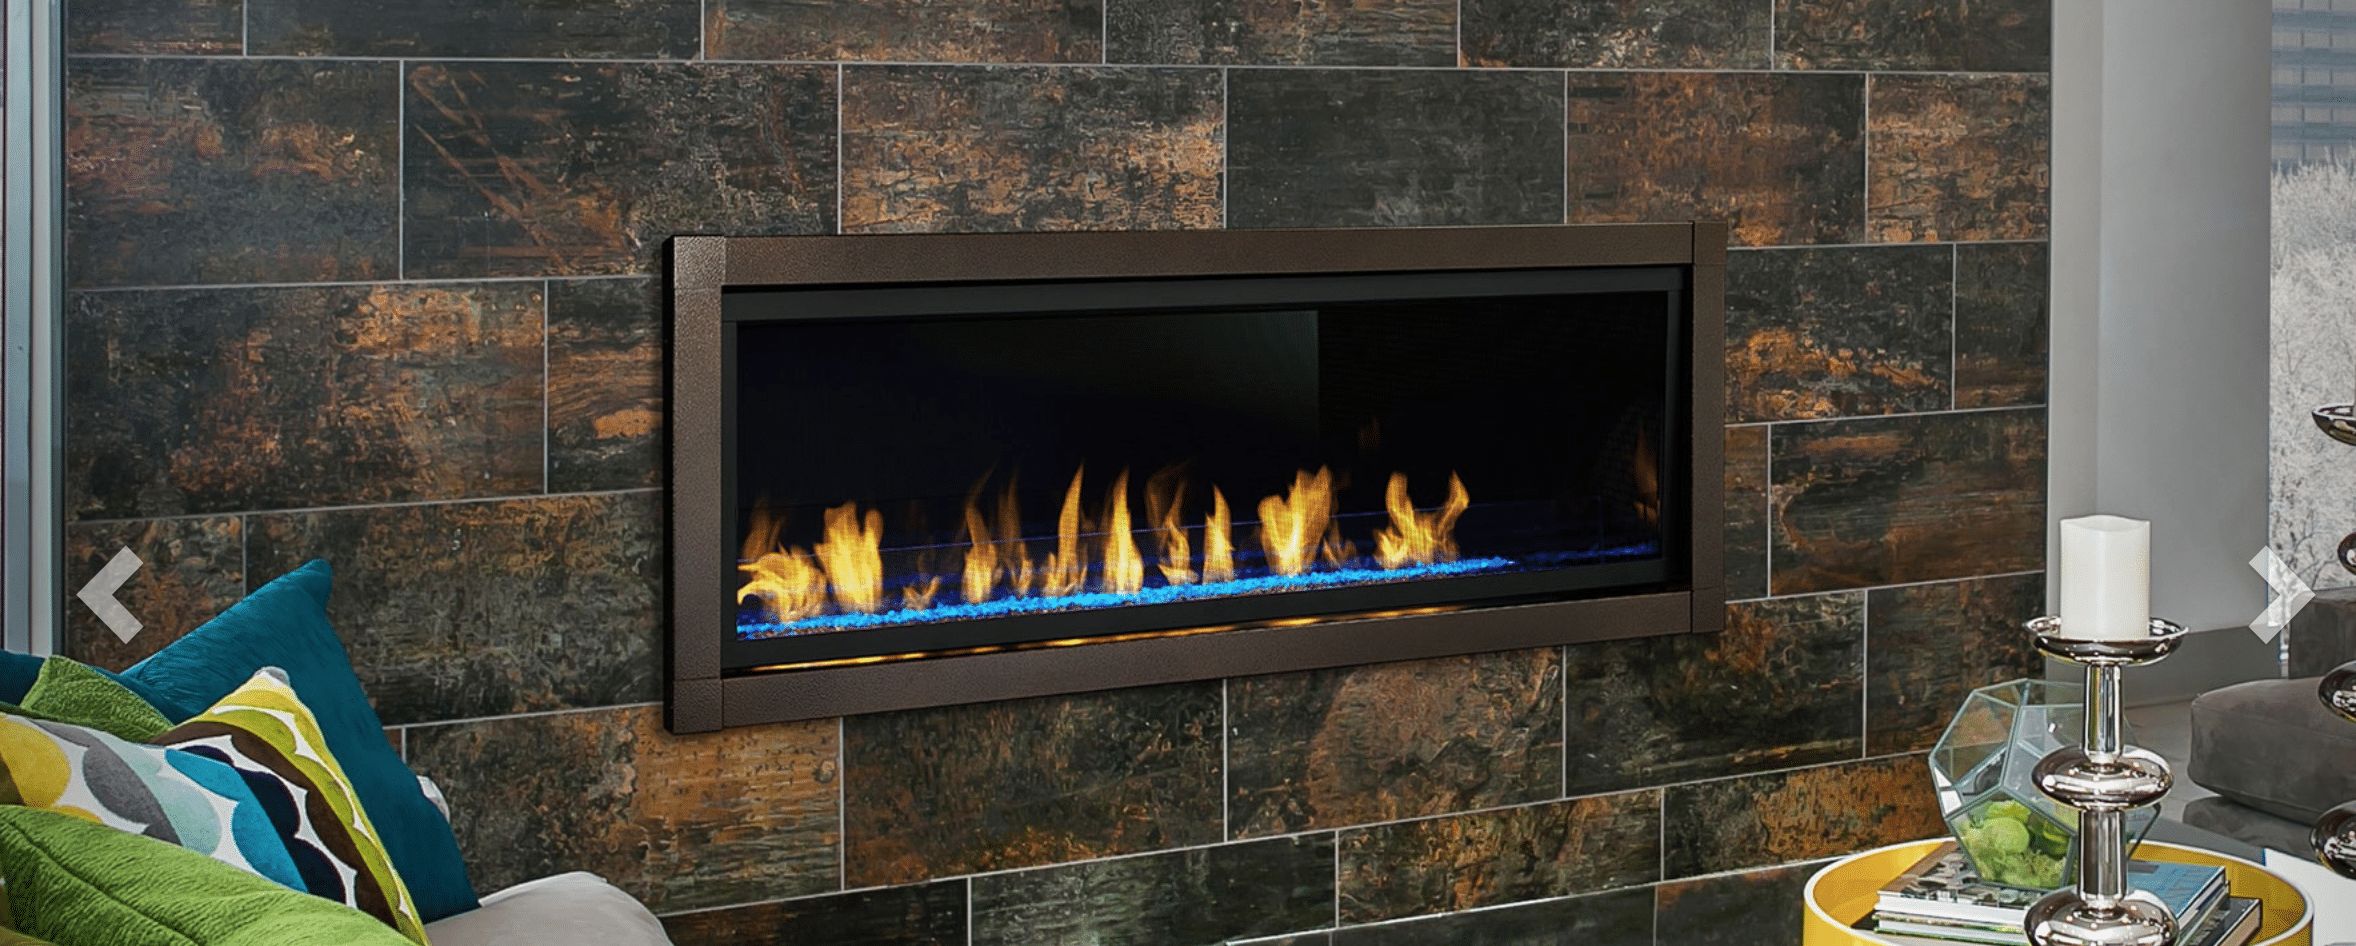 artisan vent free fireplace with modern look on dark stone fireplace